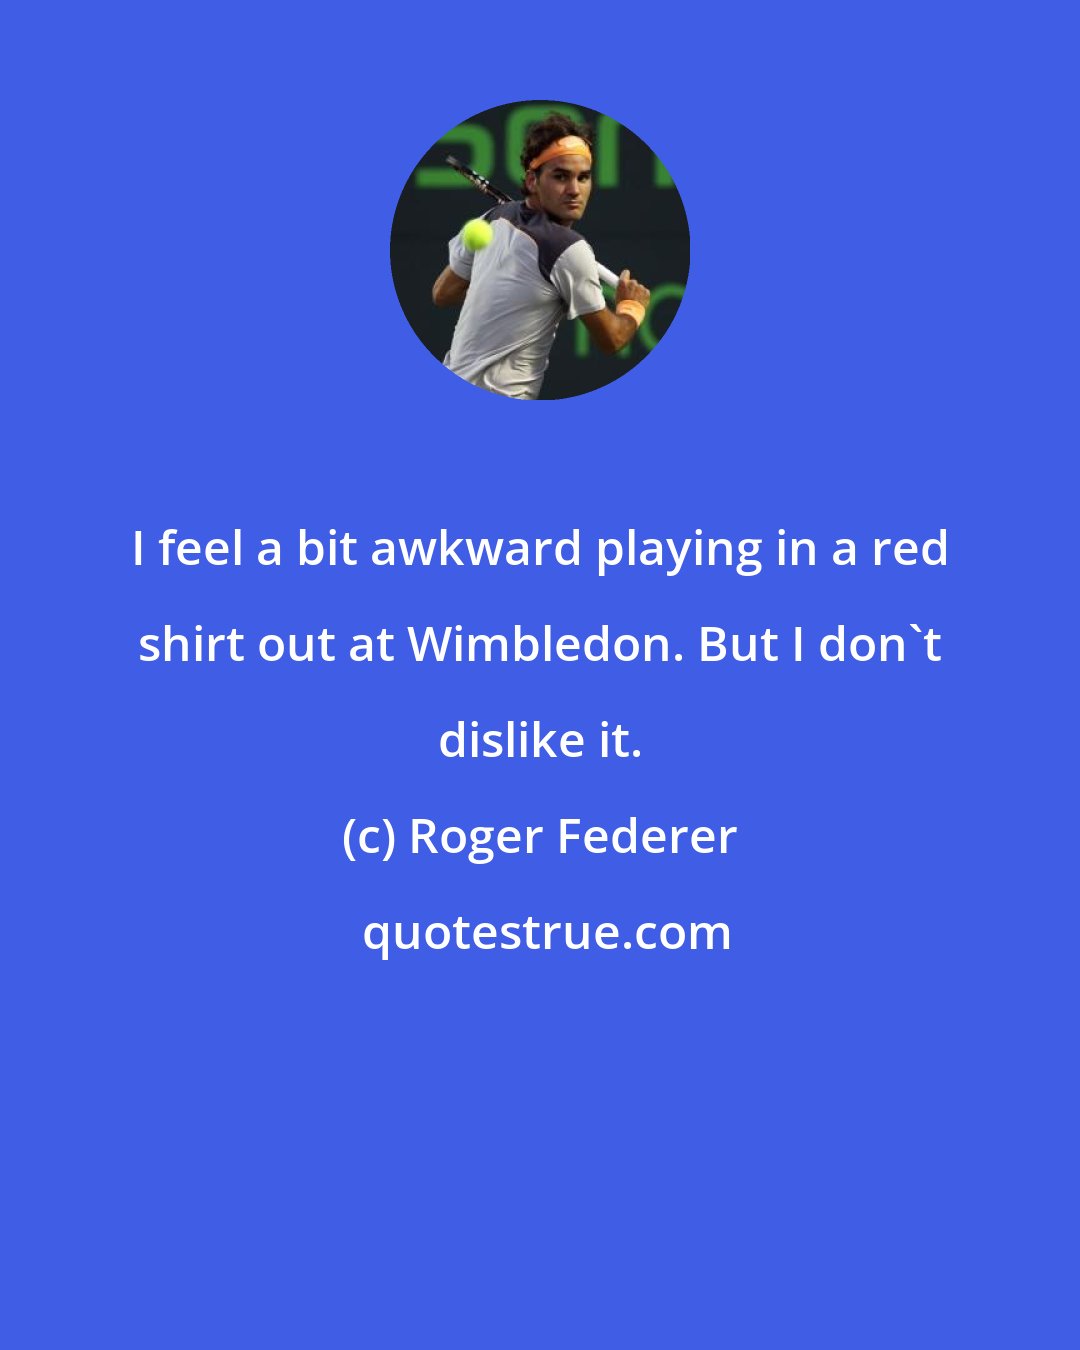 Roger Federer: I feel a bit awkward playing in a red shirt out at Wimbledon. But I don't dislike it.